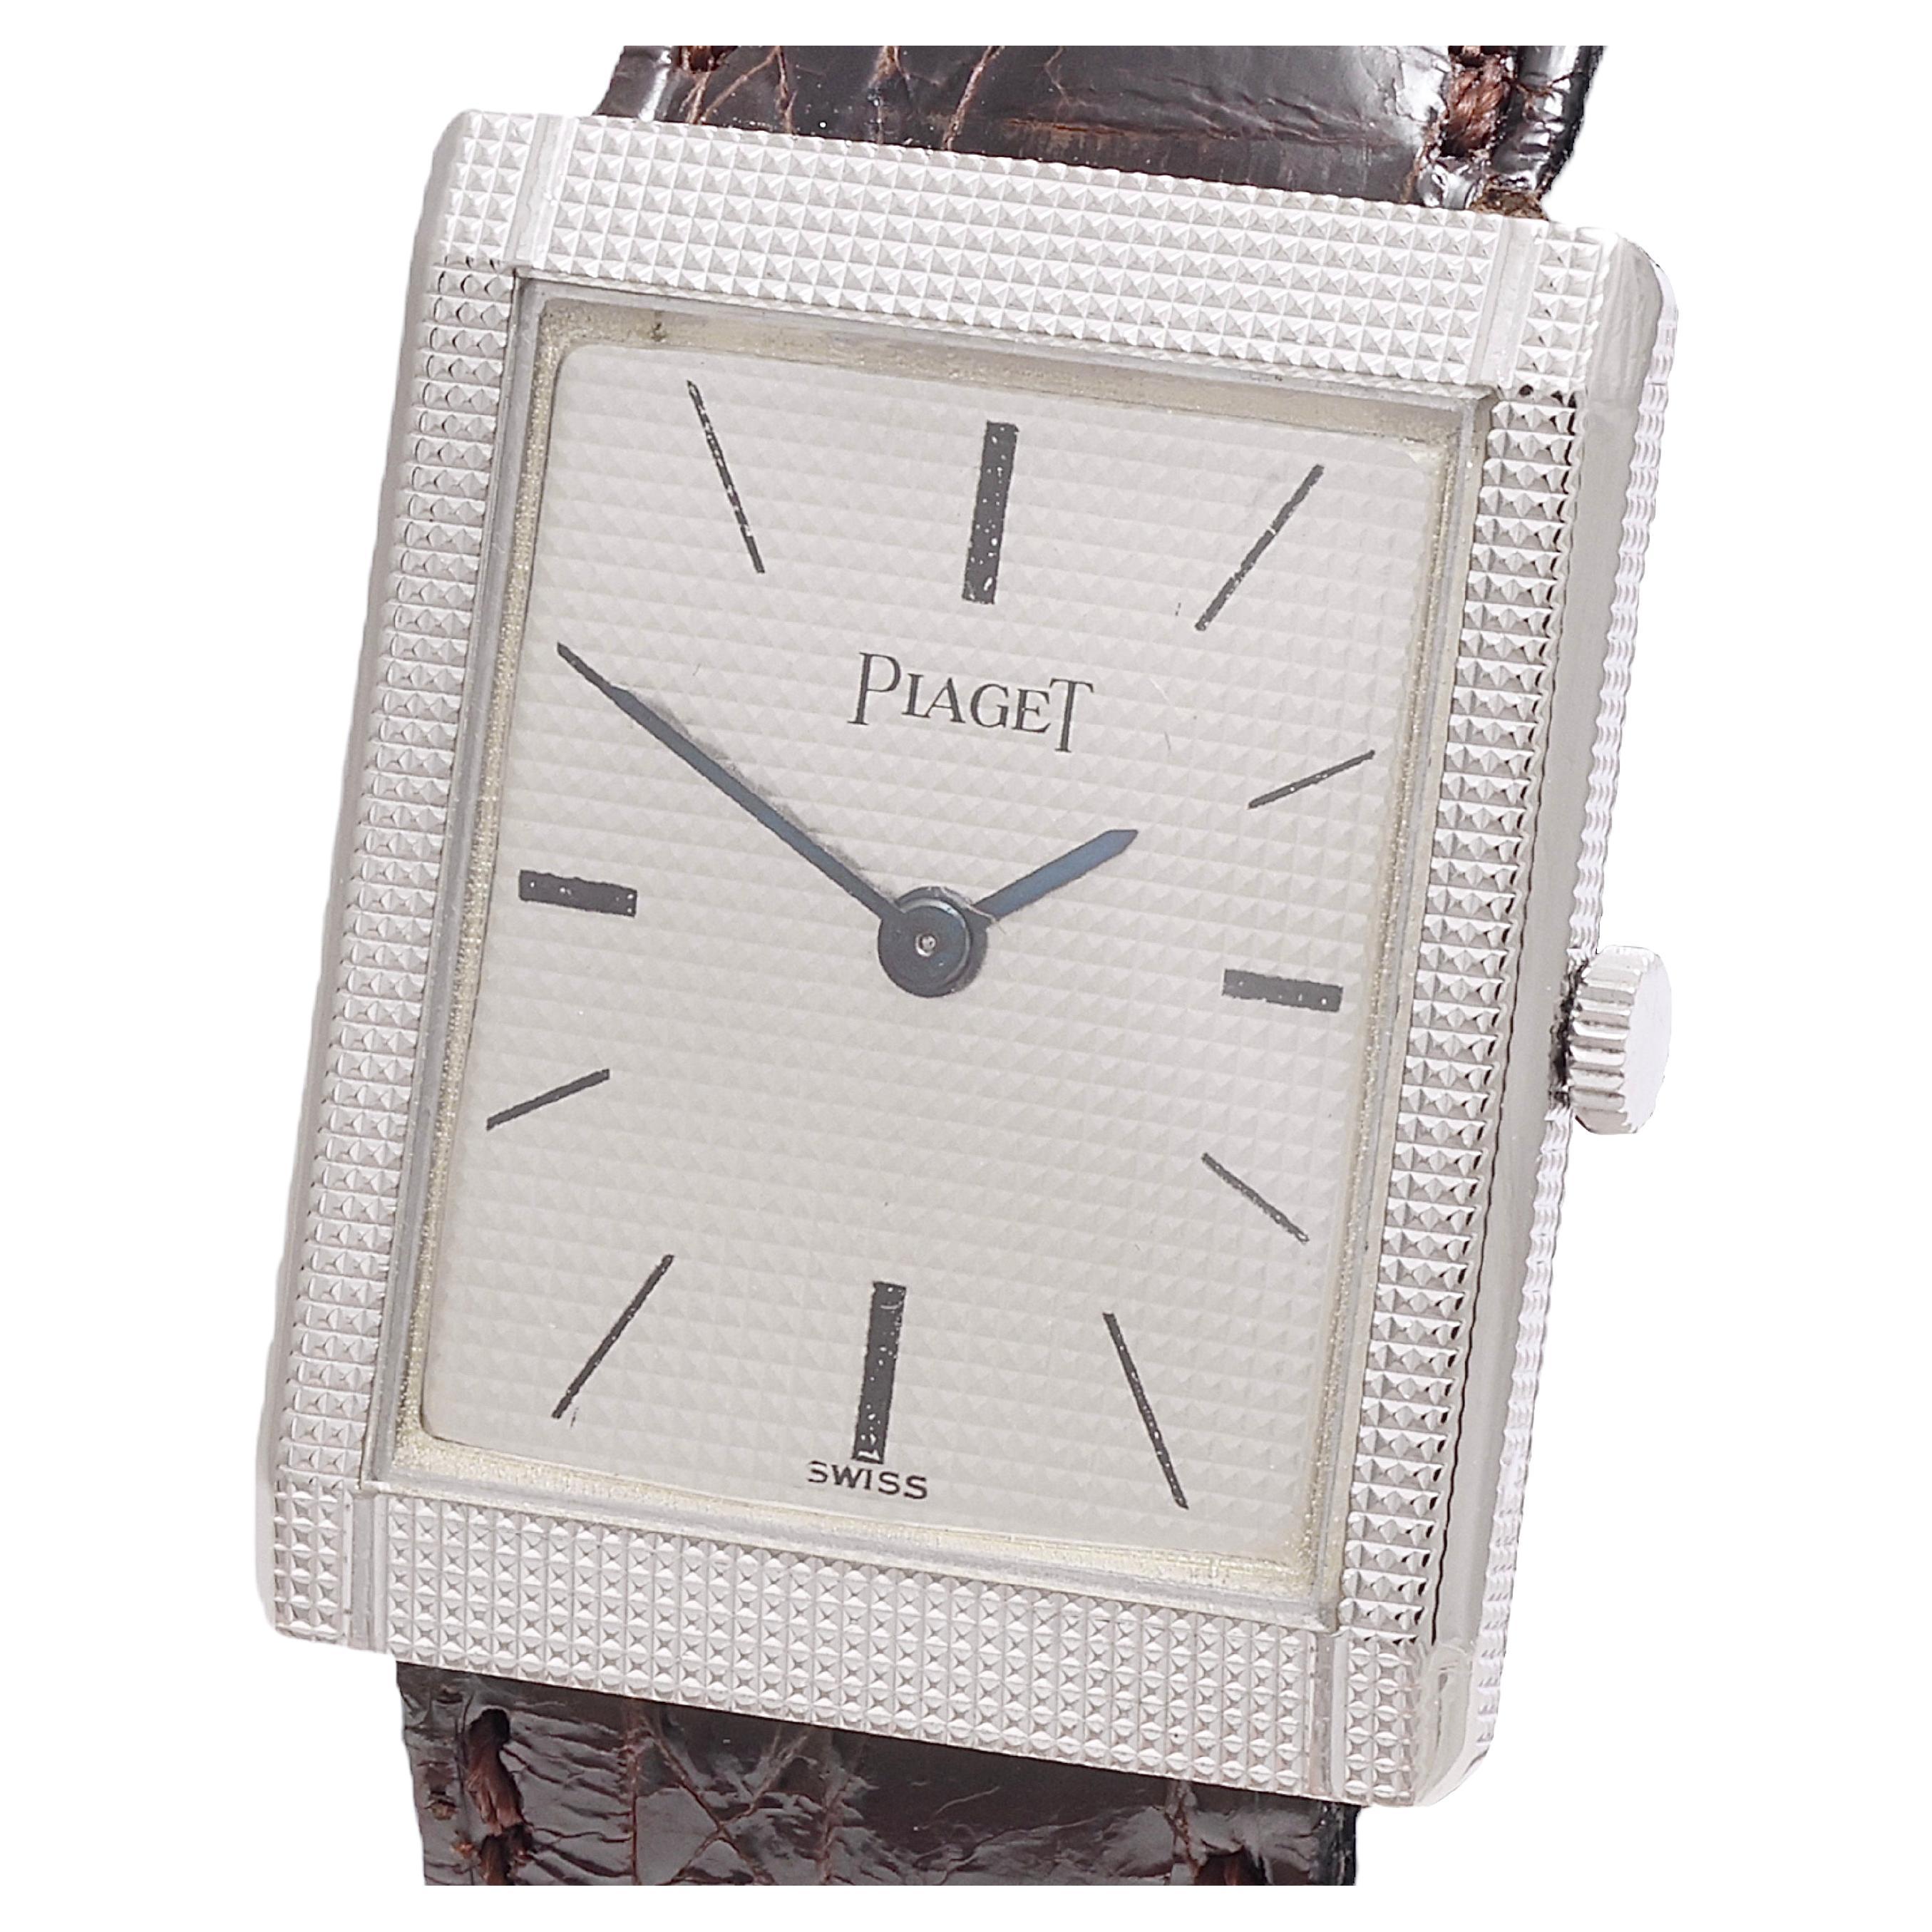 18 kt. White Gold Piaget Wrist Watch, Manual Winding Ultra Thin, Collectors For Sale